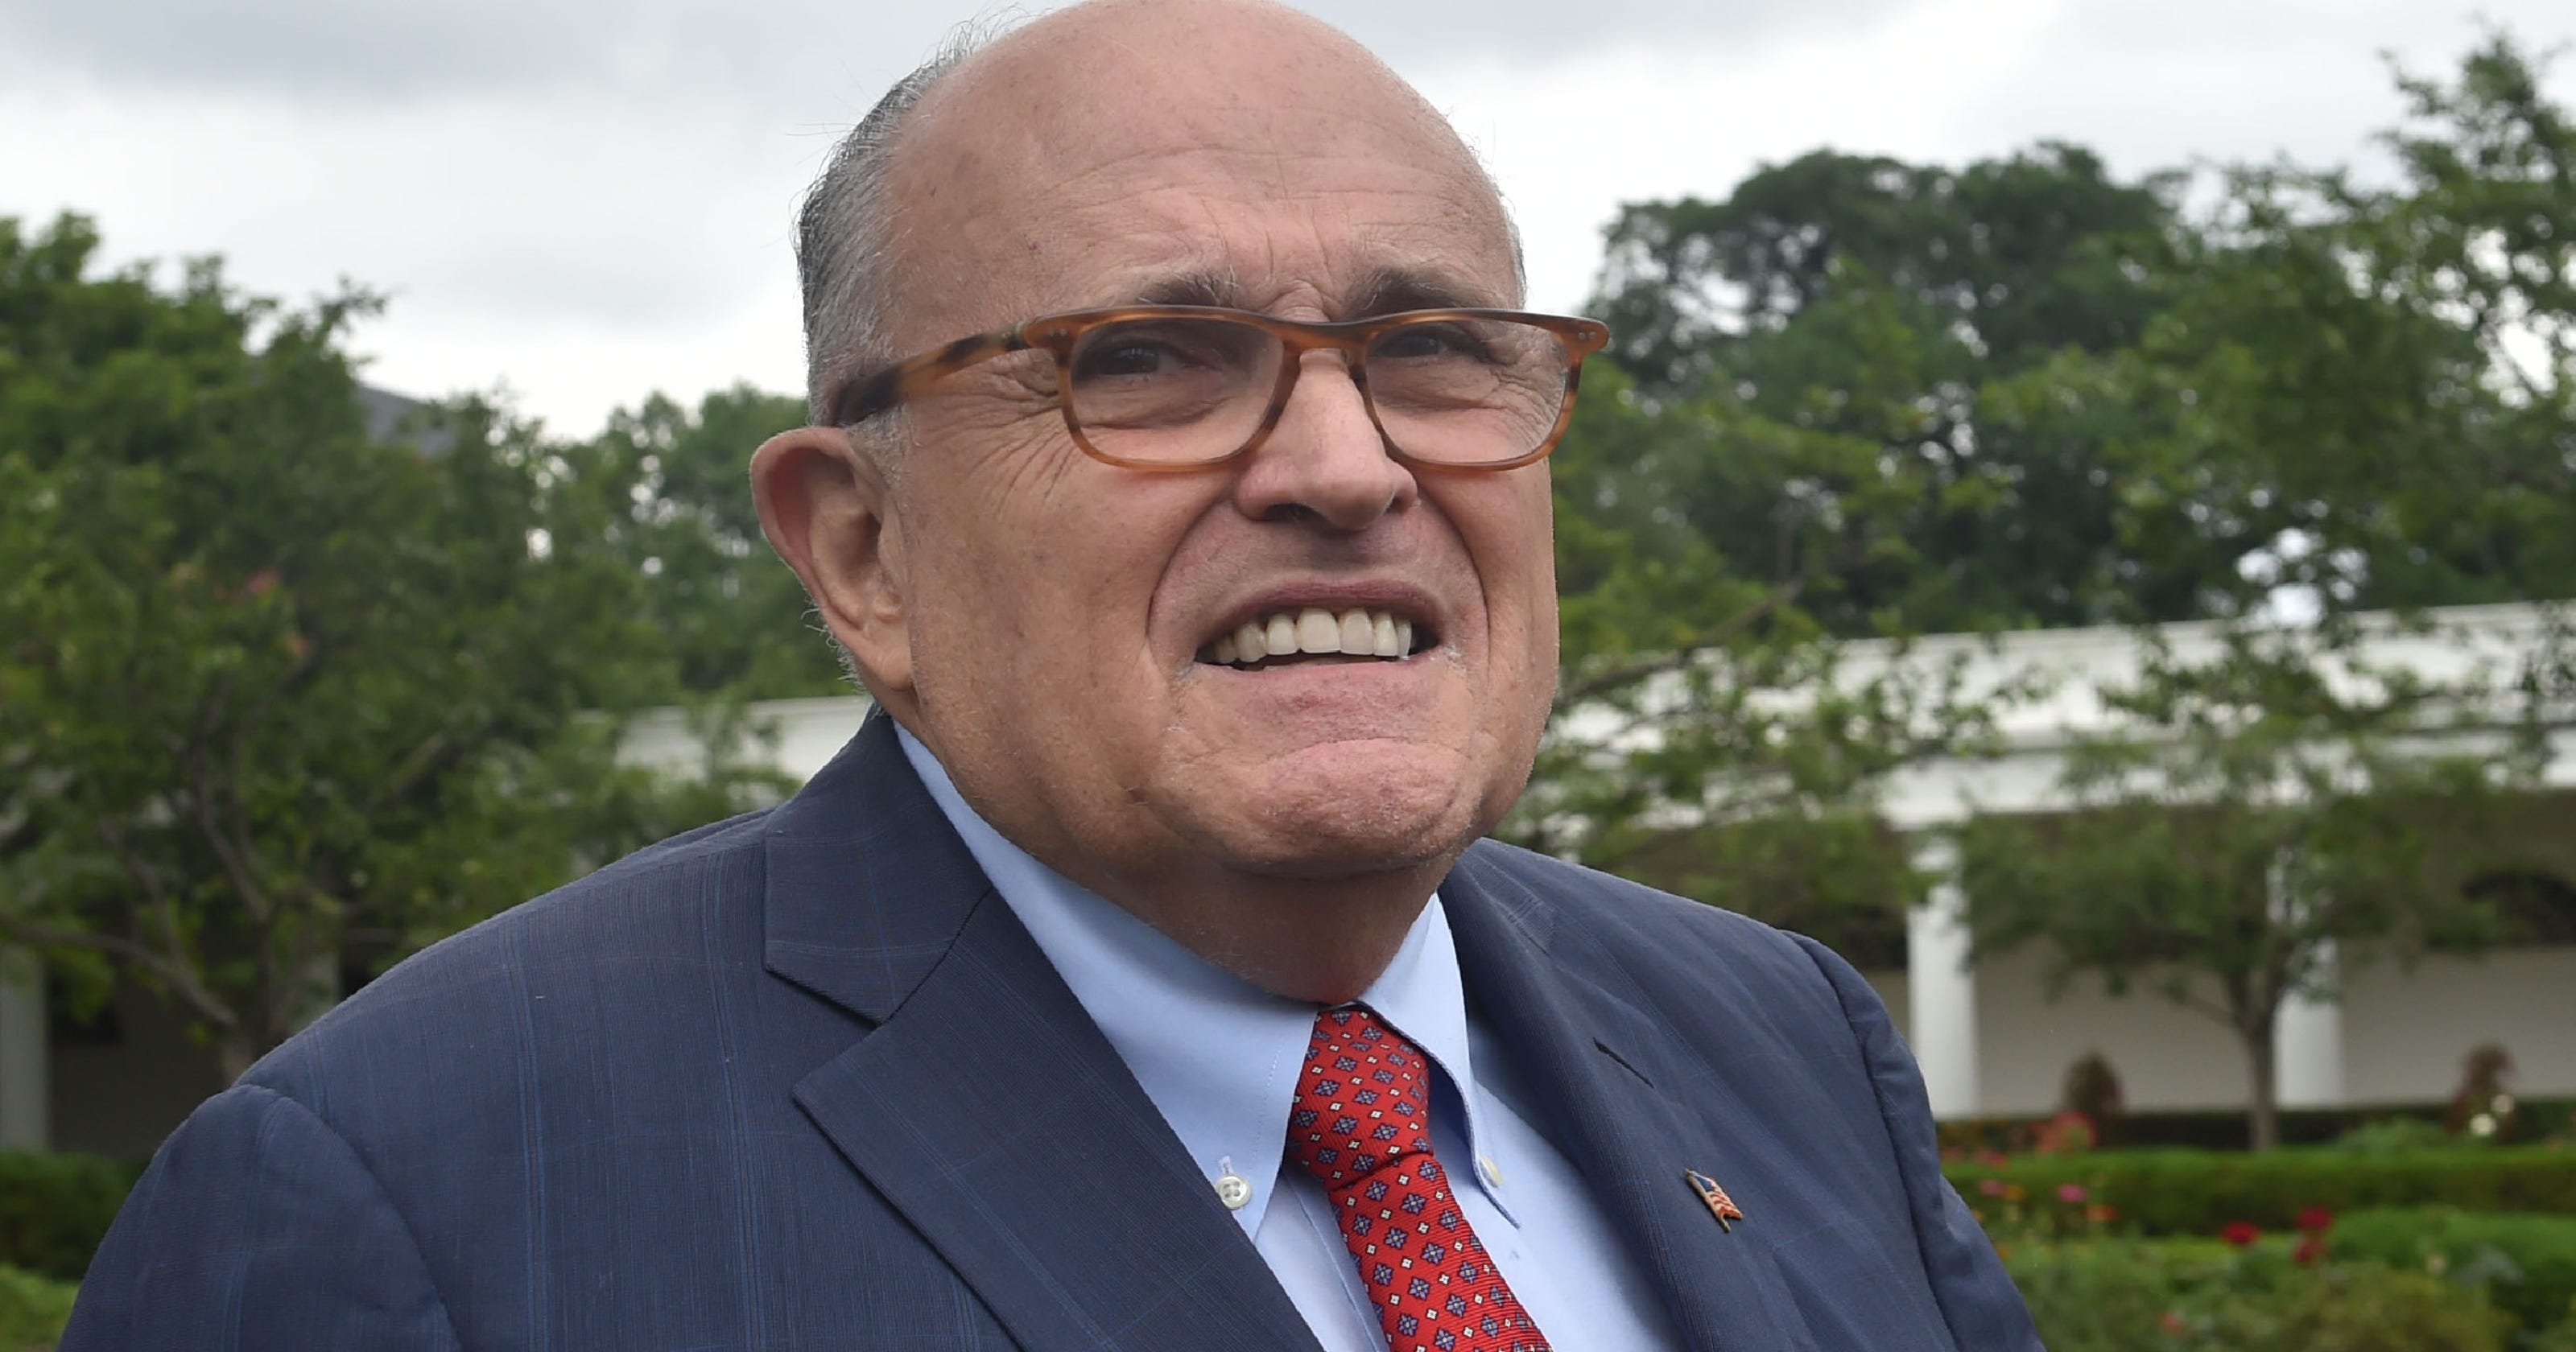 Rudy Giuliani says Americans 'would revolt' if Trump is impeached3200 x 1680